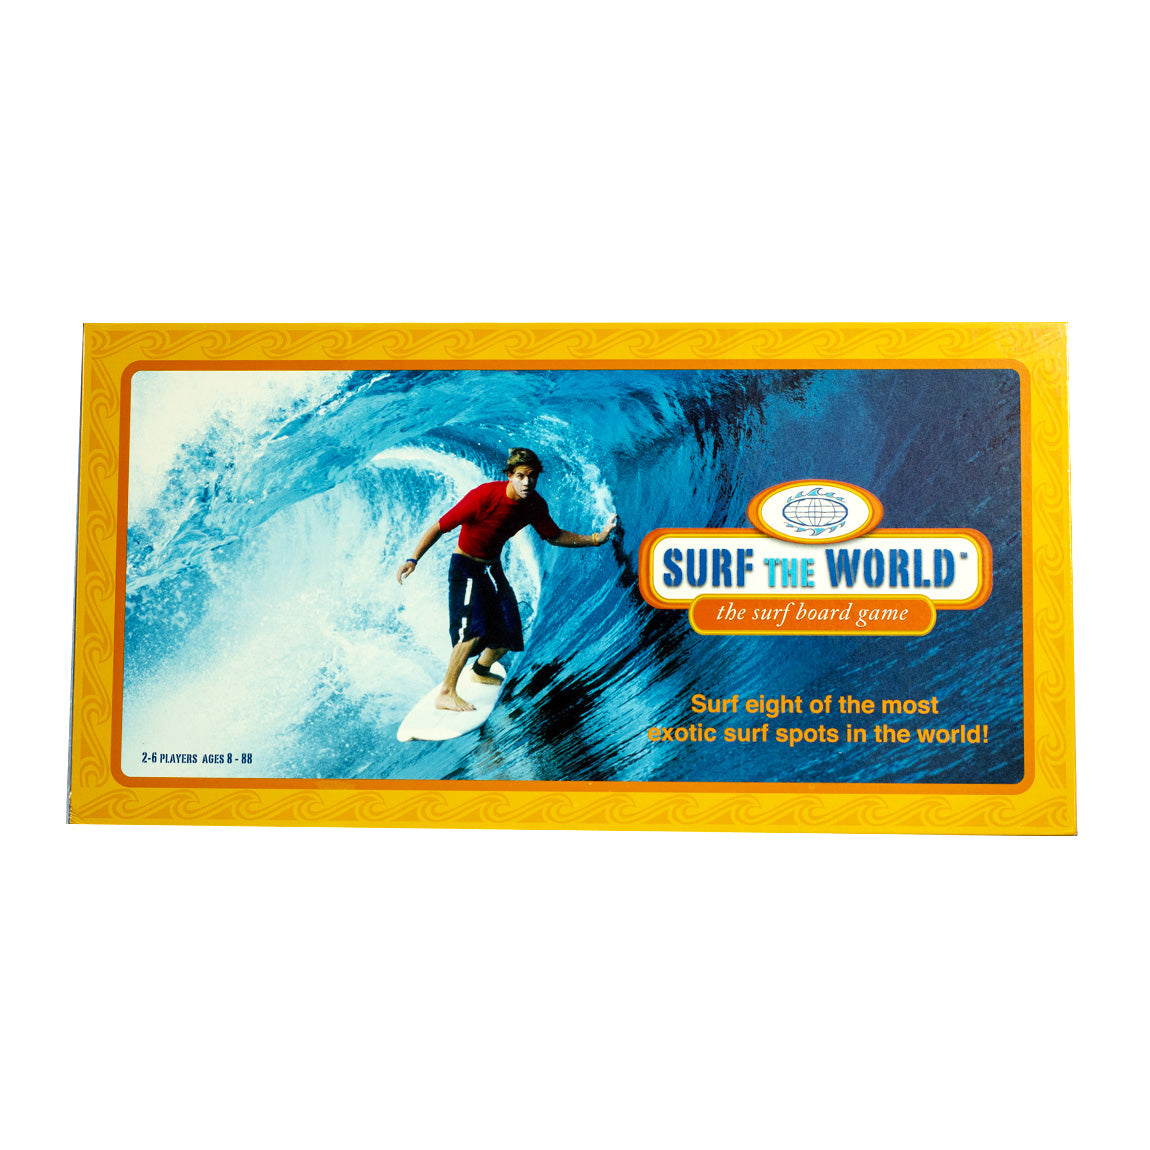 SURF THE WORLD BOARD GAME